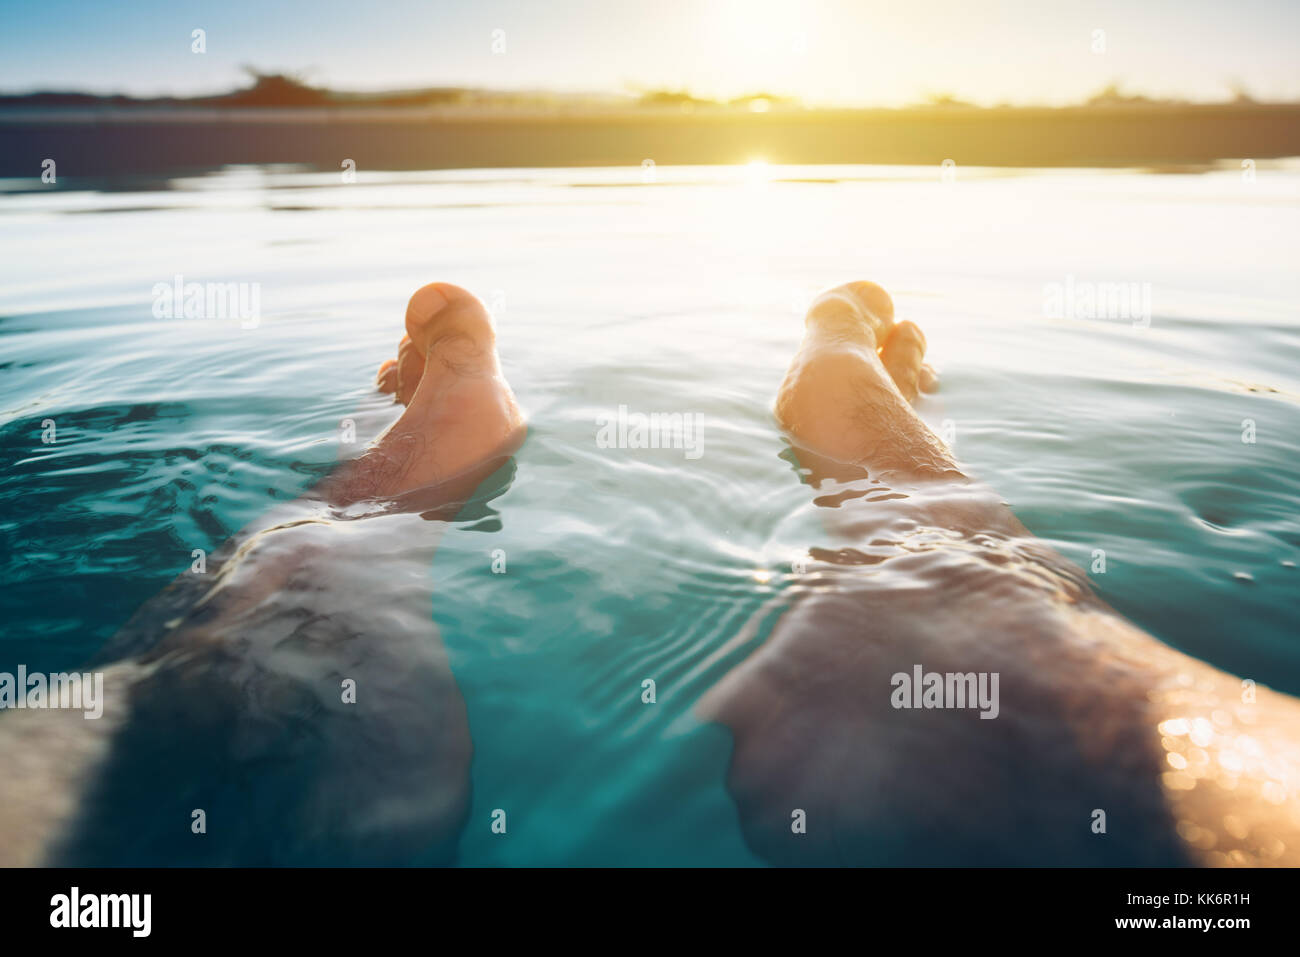 Male feet in outdoor swimming pool. Man enjoying refreshing poolside water in summer sunset. Holidays vacations and weekend activities. Stock Photo